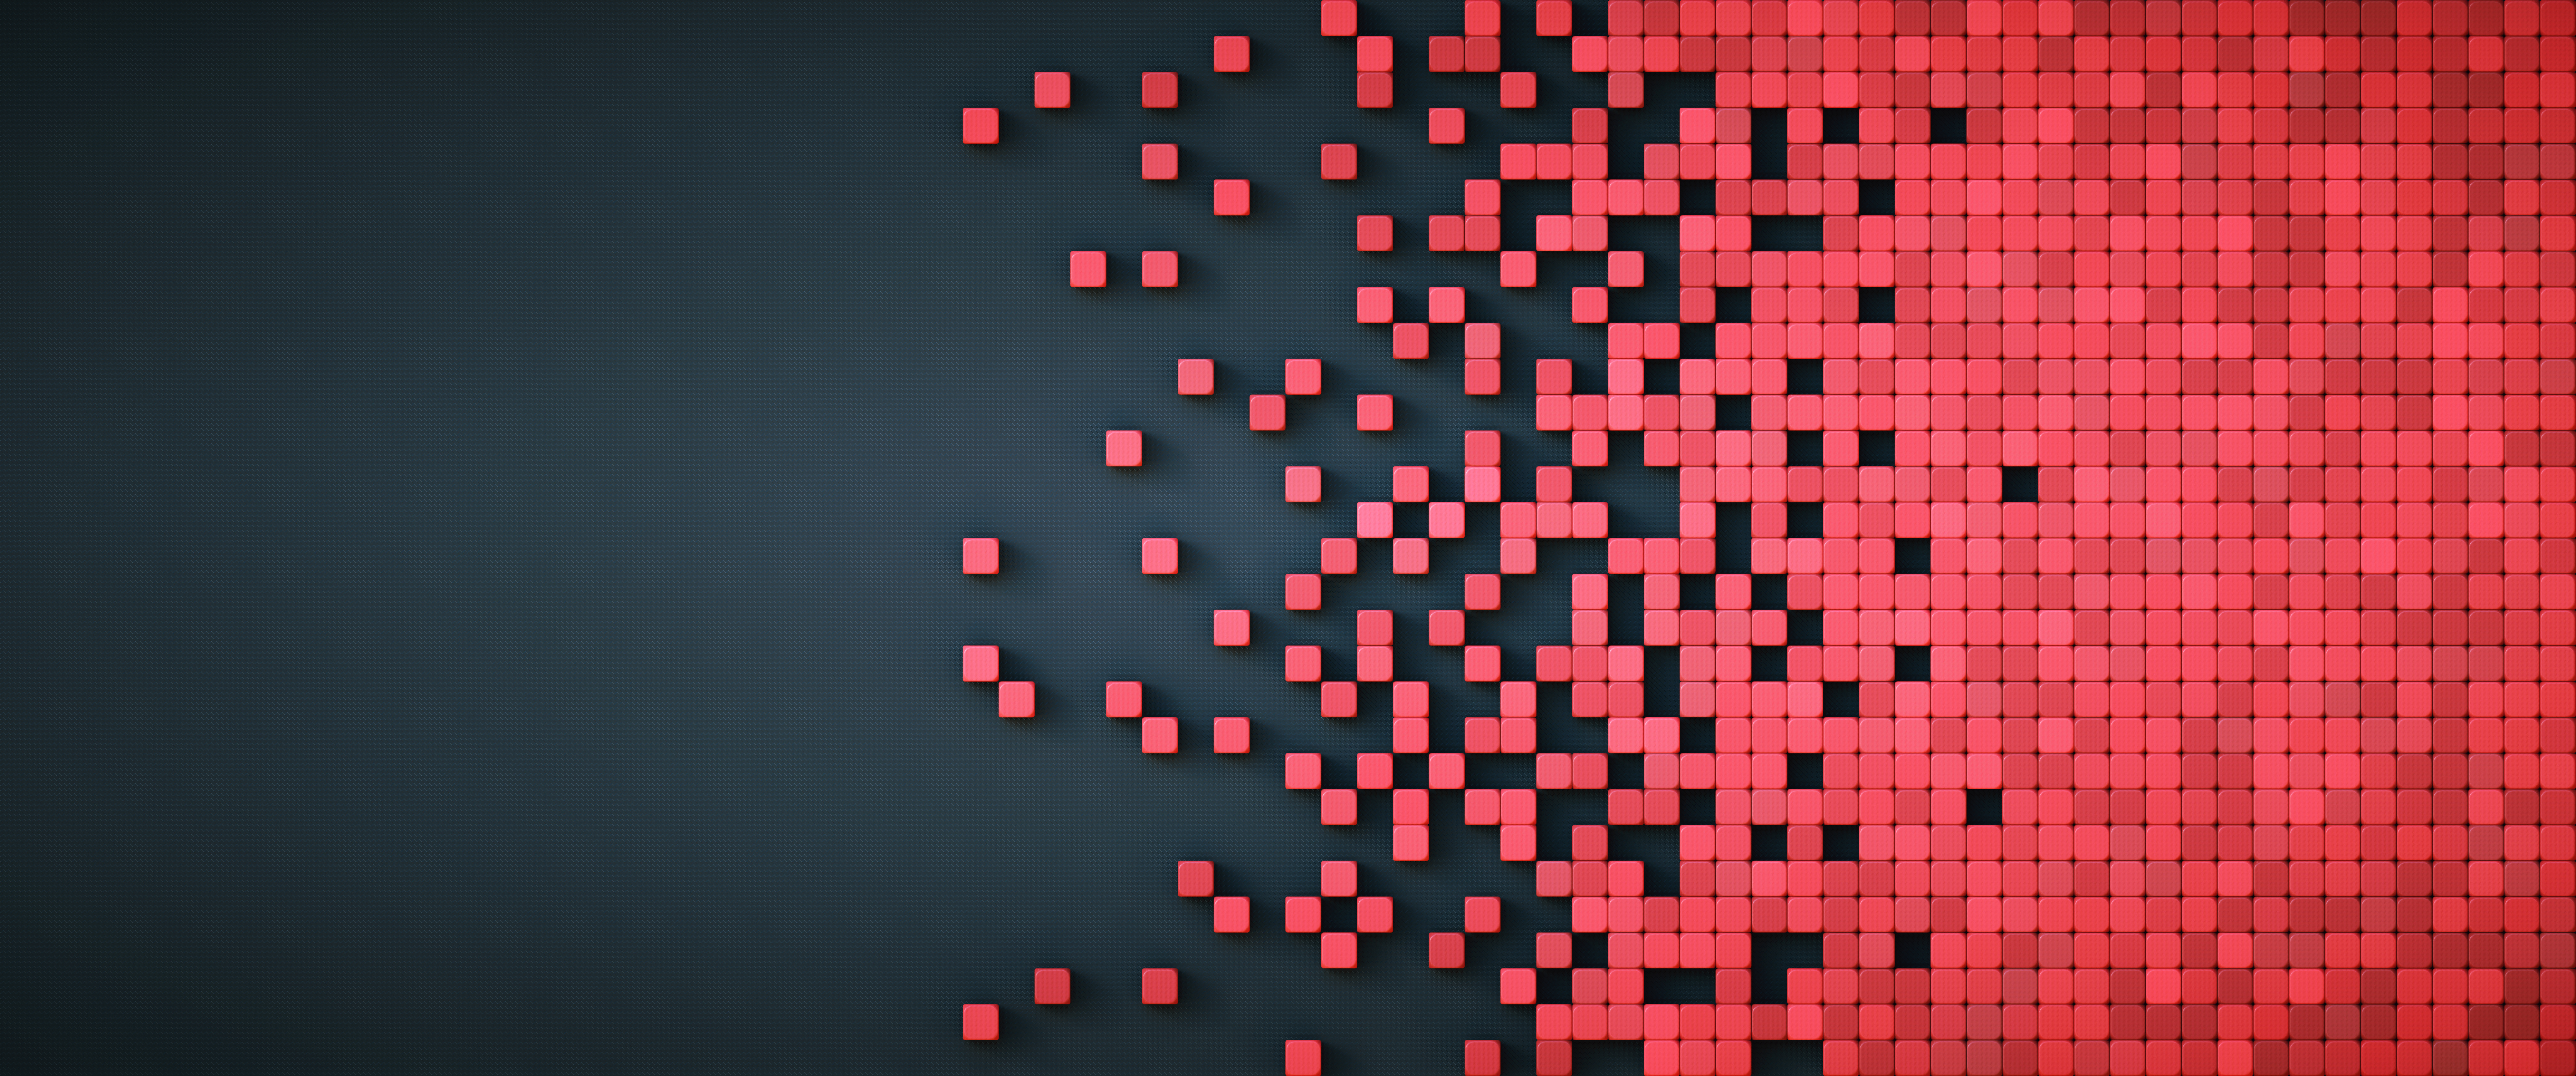 Pixelated data representation with red physical cube shapes on black artificial background, tileable composition